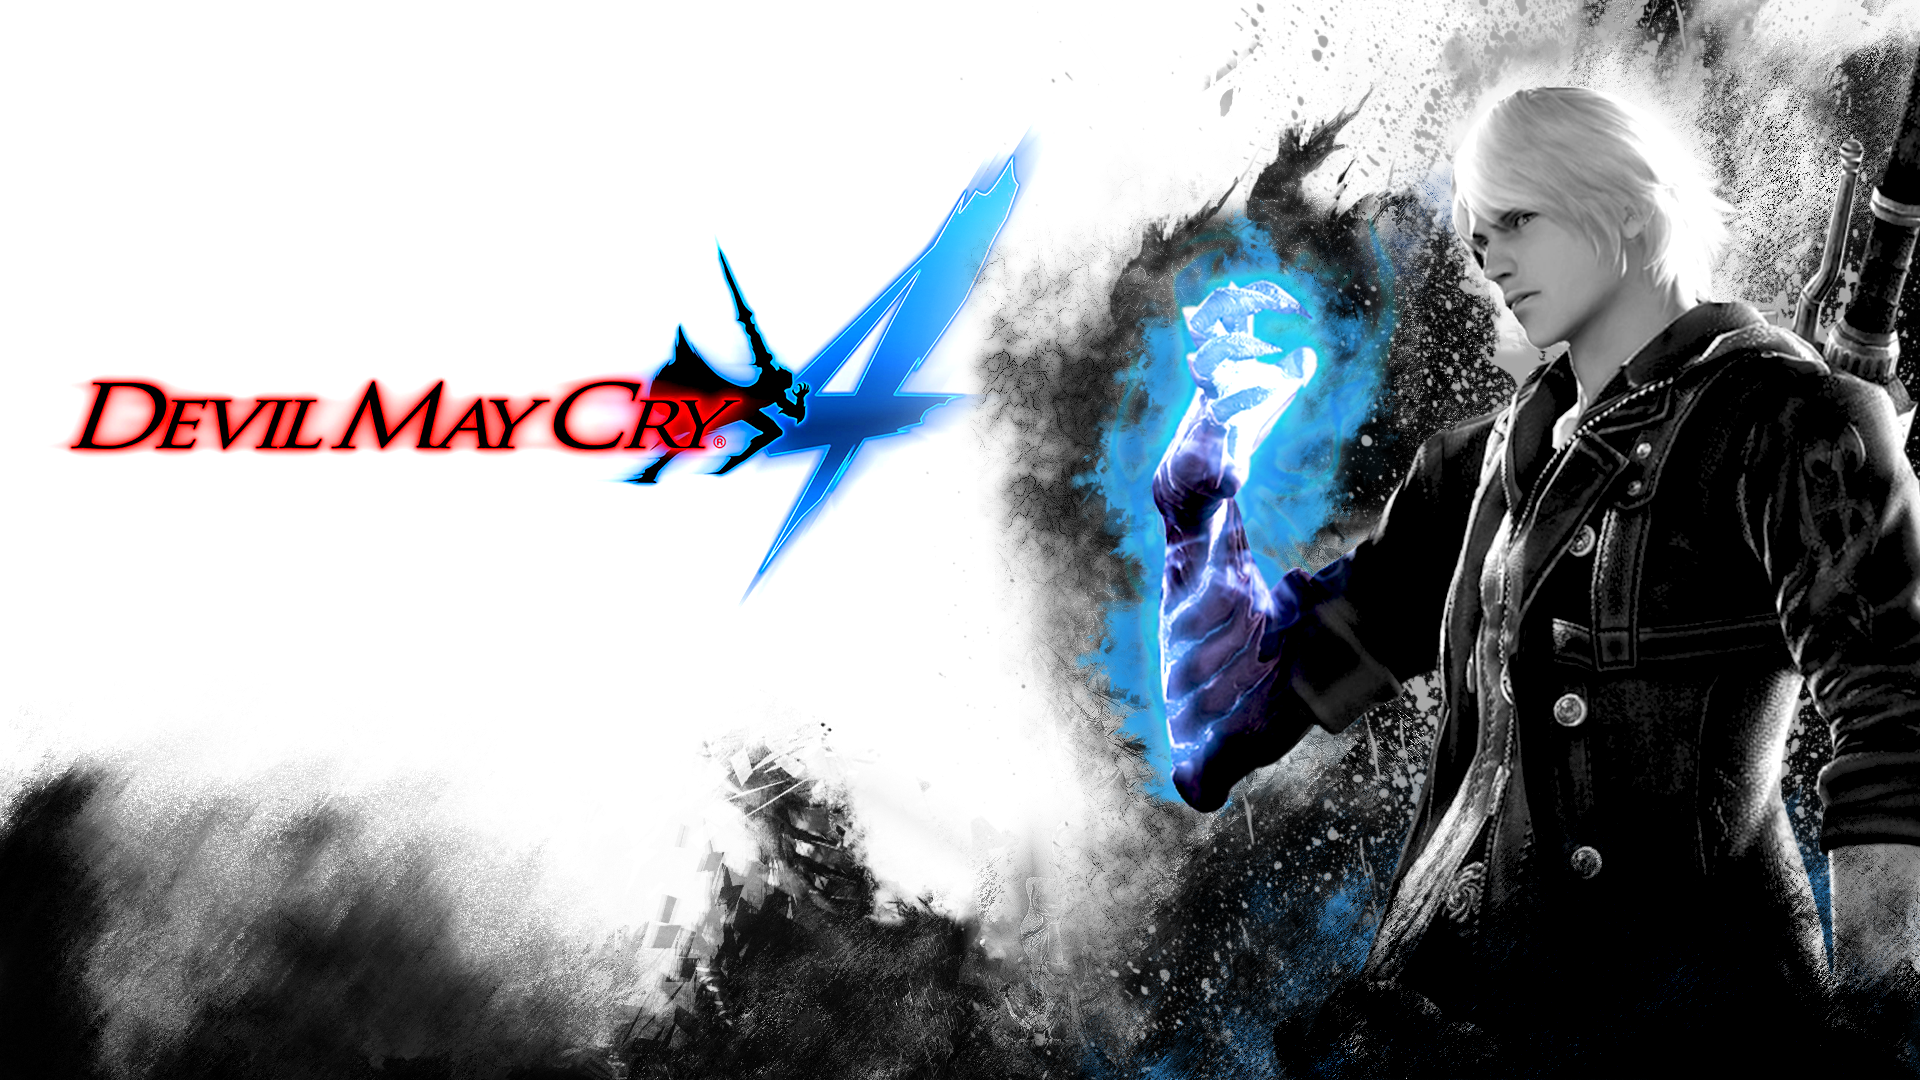 devil may cry 5 pc game free download highly compressed